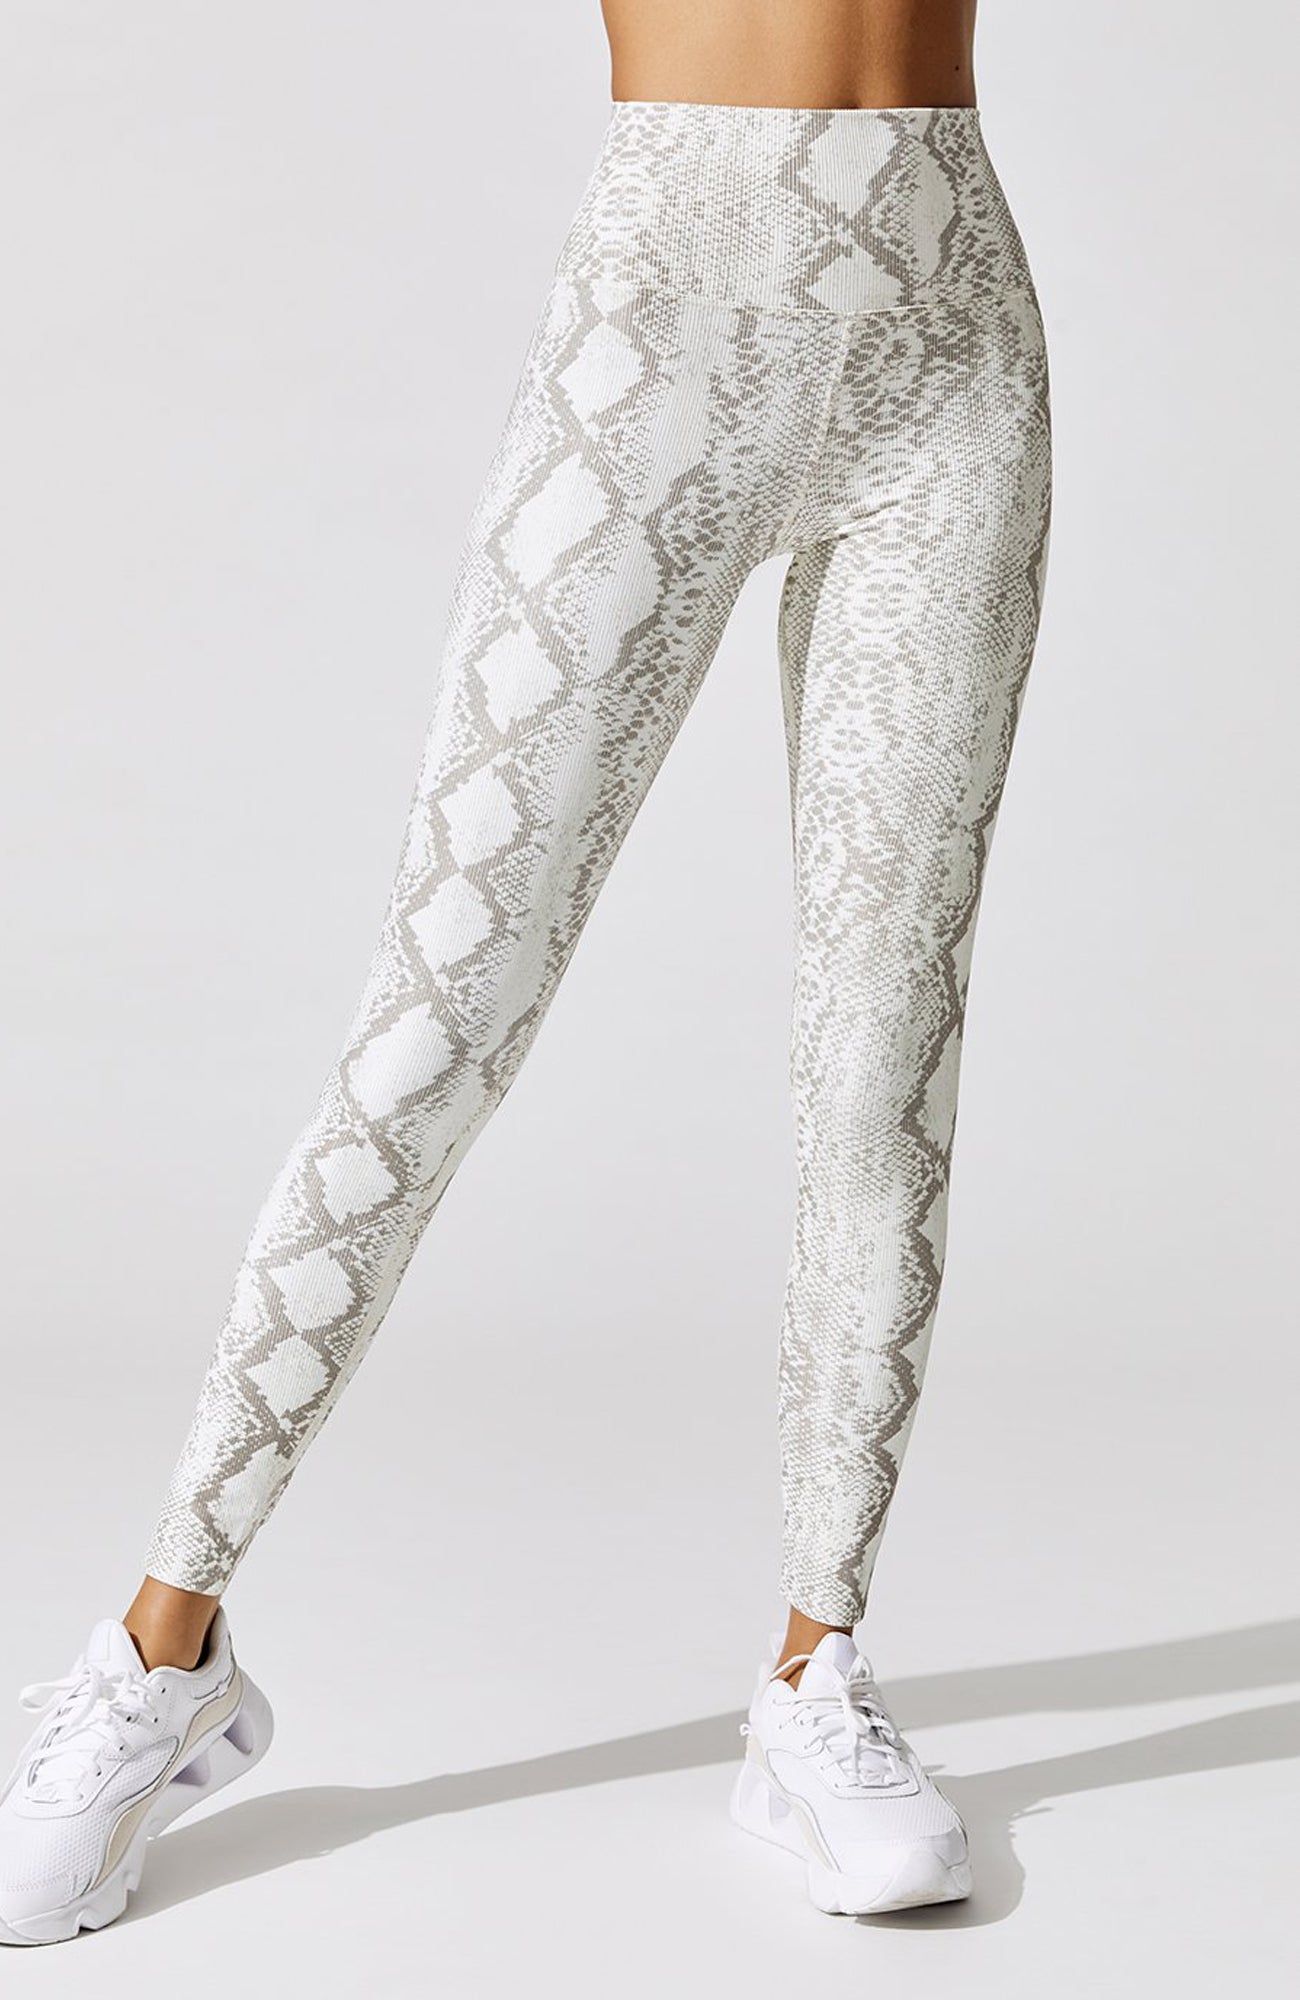 Beach Riot Ayla Leggings  Anthropologie Singapore - Women's Clothing,  Accessories & Home